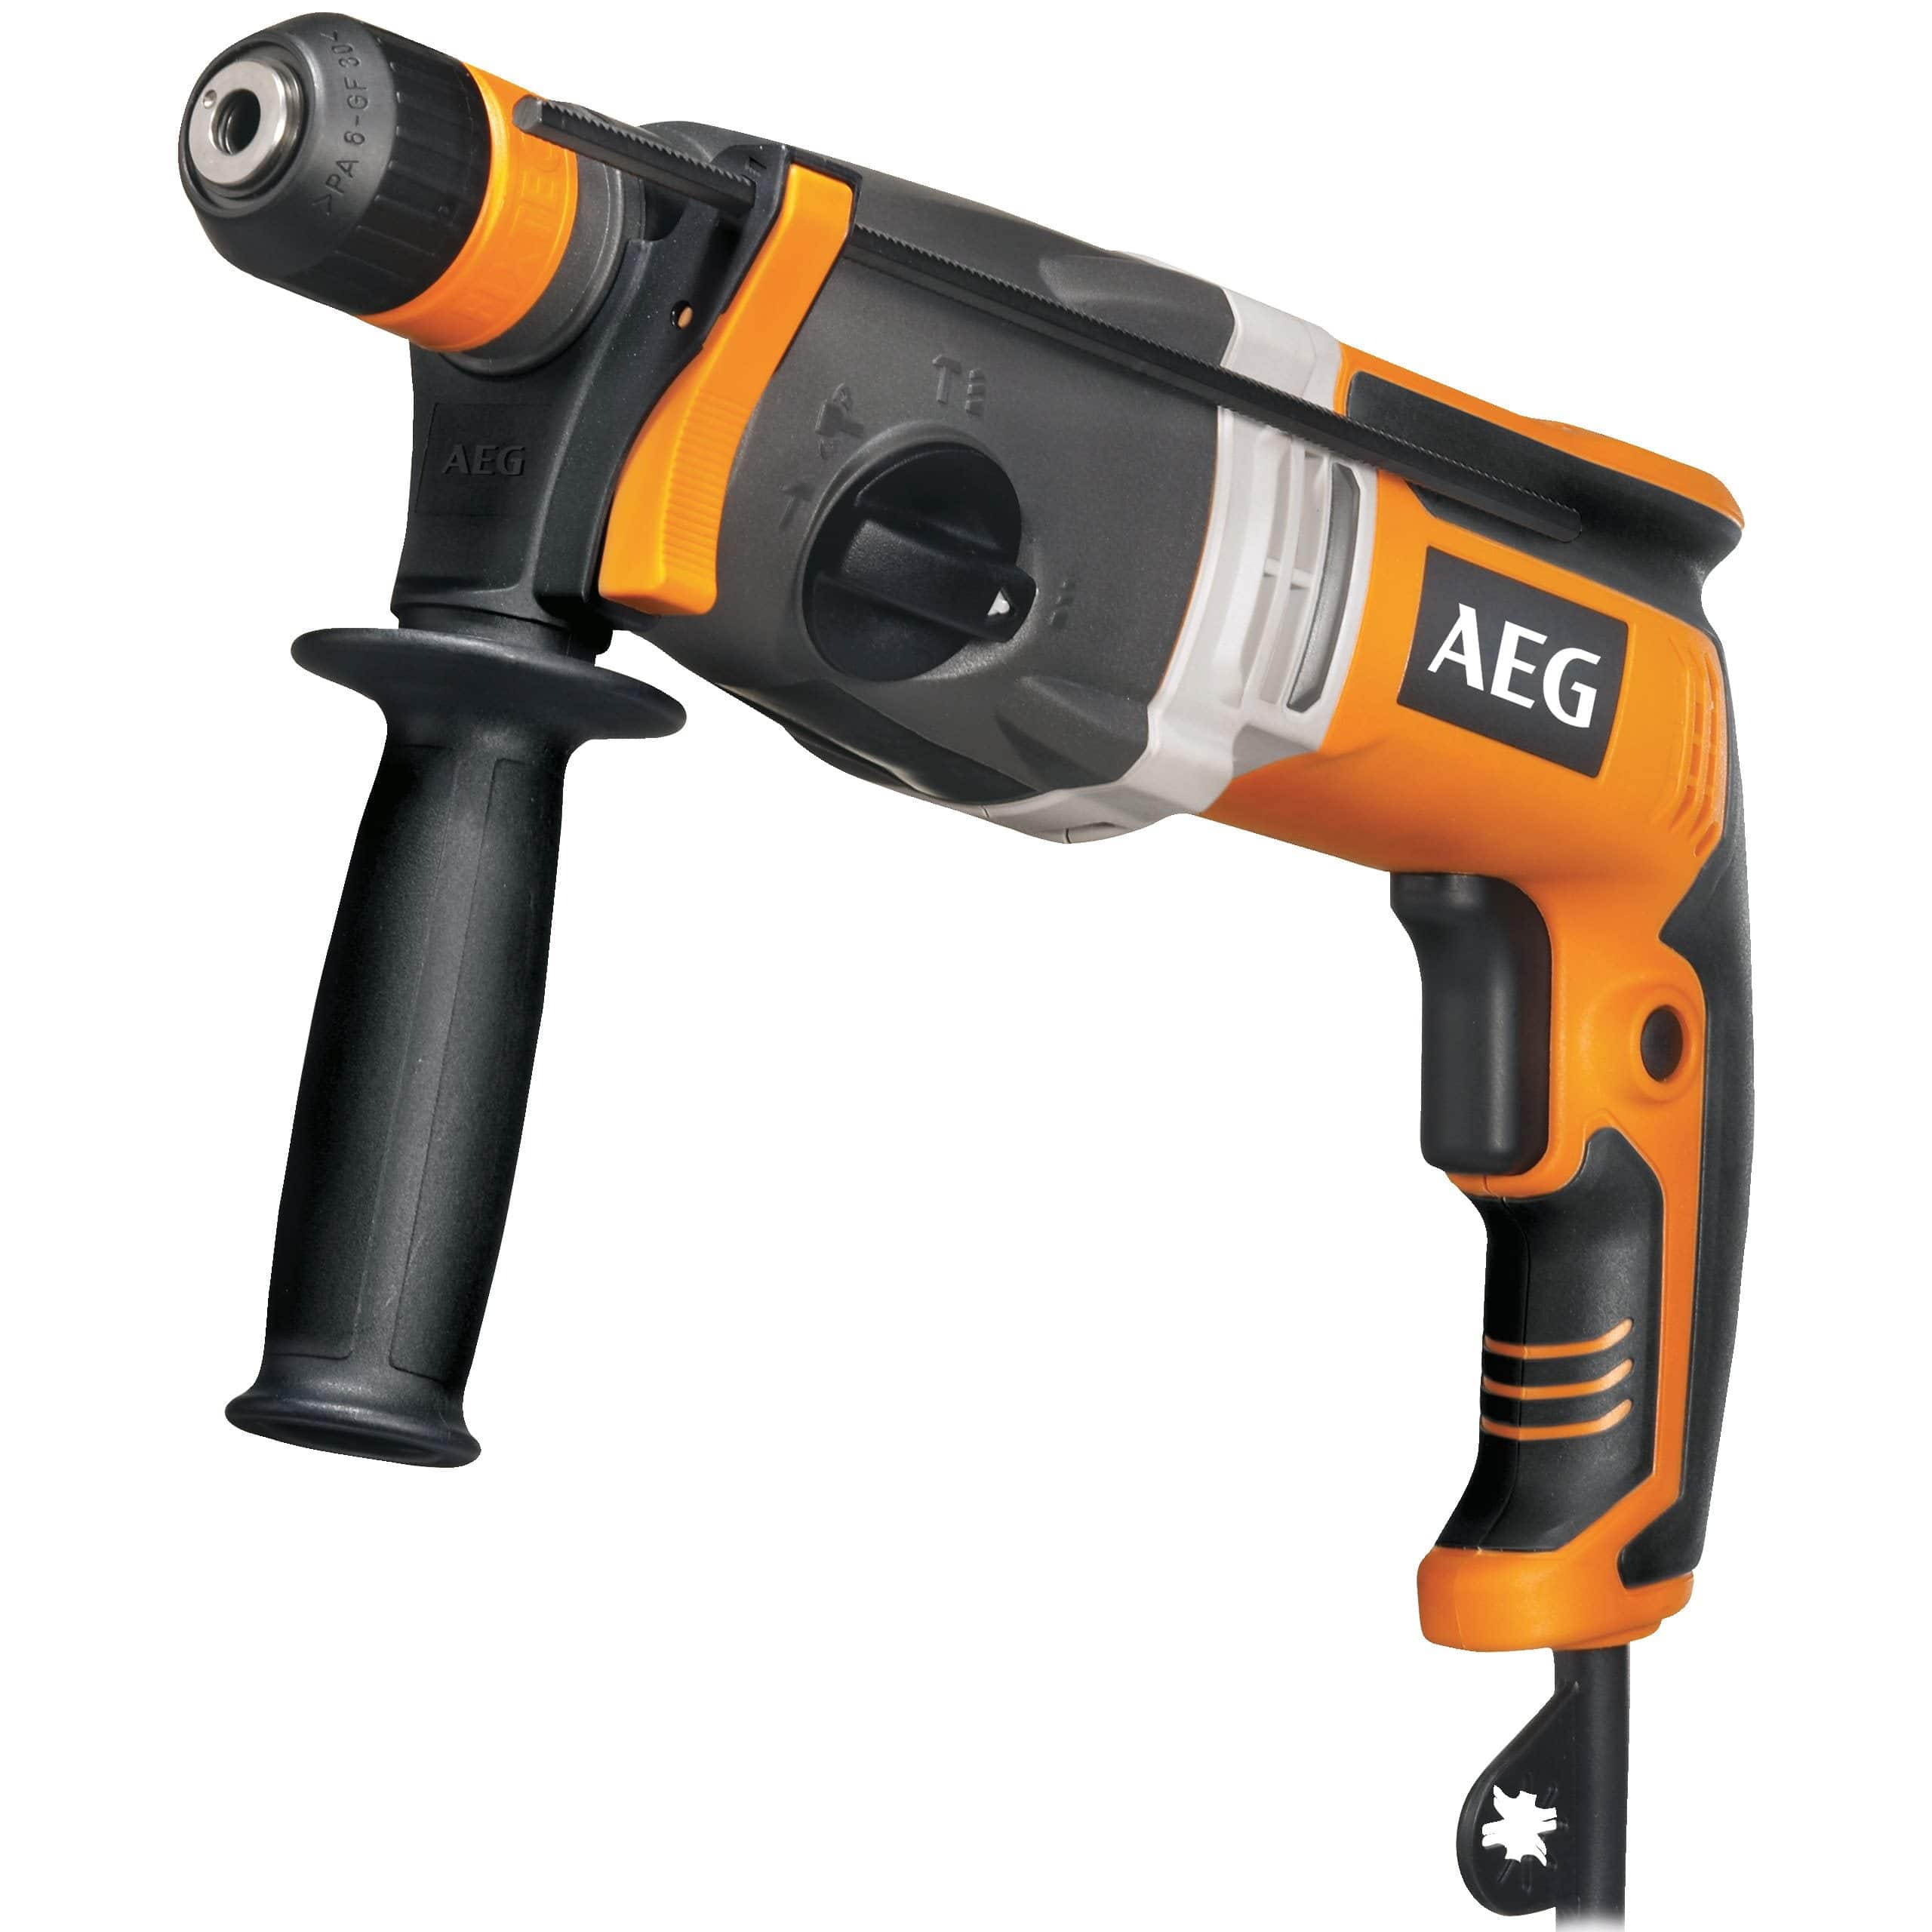 AEG SDS-Plus Combi Hammer 3-Mode Drill 26mm 800W - KH24IE | Supply Master Accra, Ghana Drill Buy Tools hardware Building materials